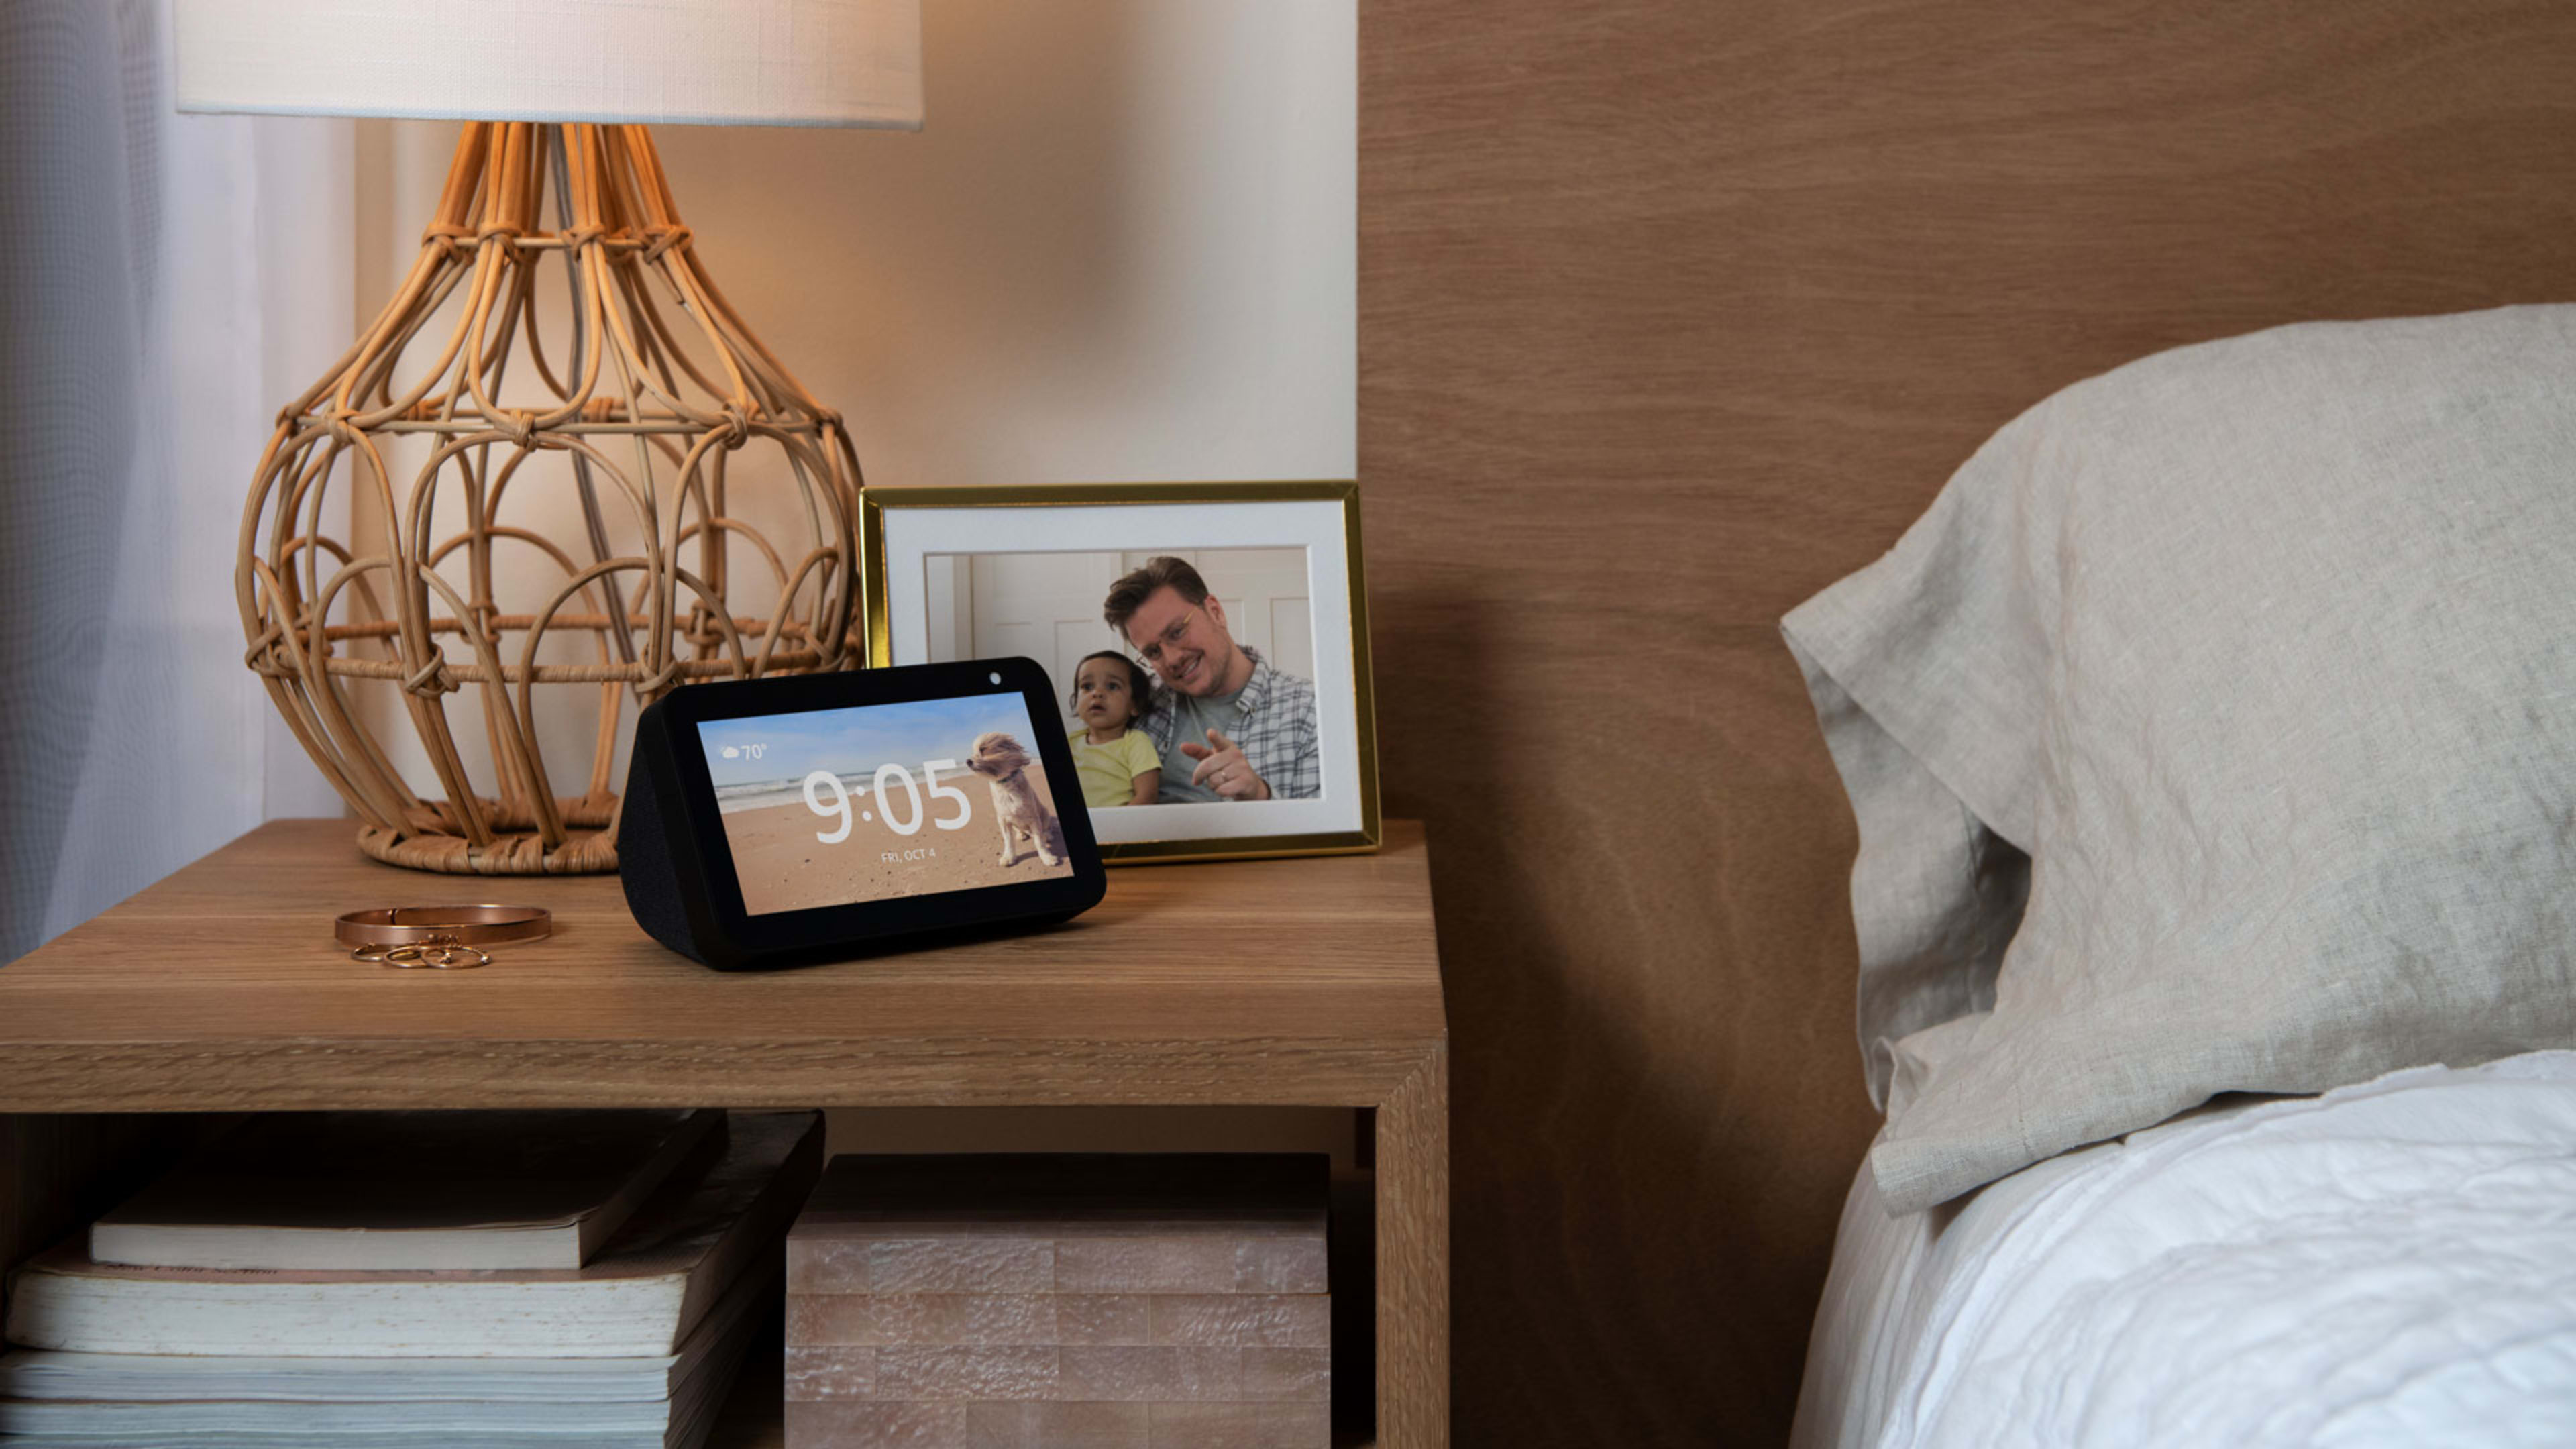 Amazon introduces $90 “mini” Echo Show with HD and new privacy shutter